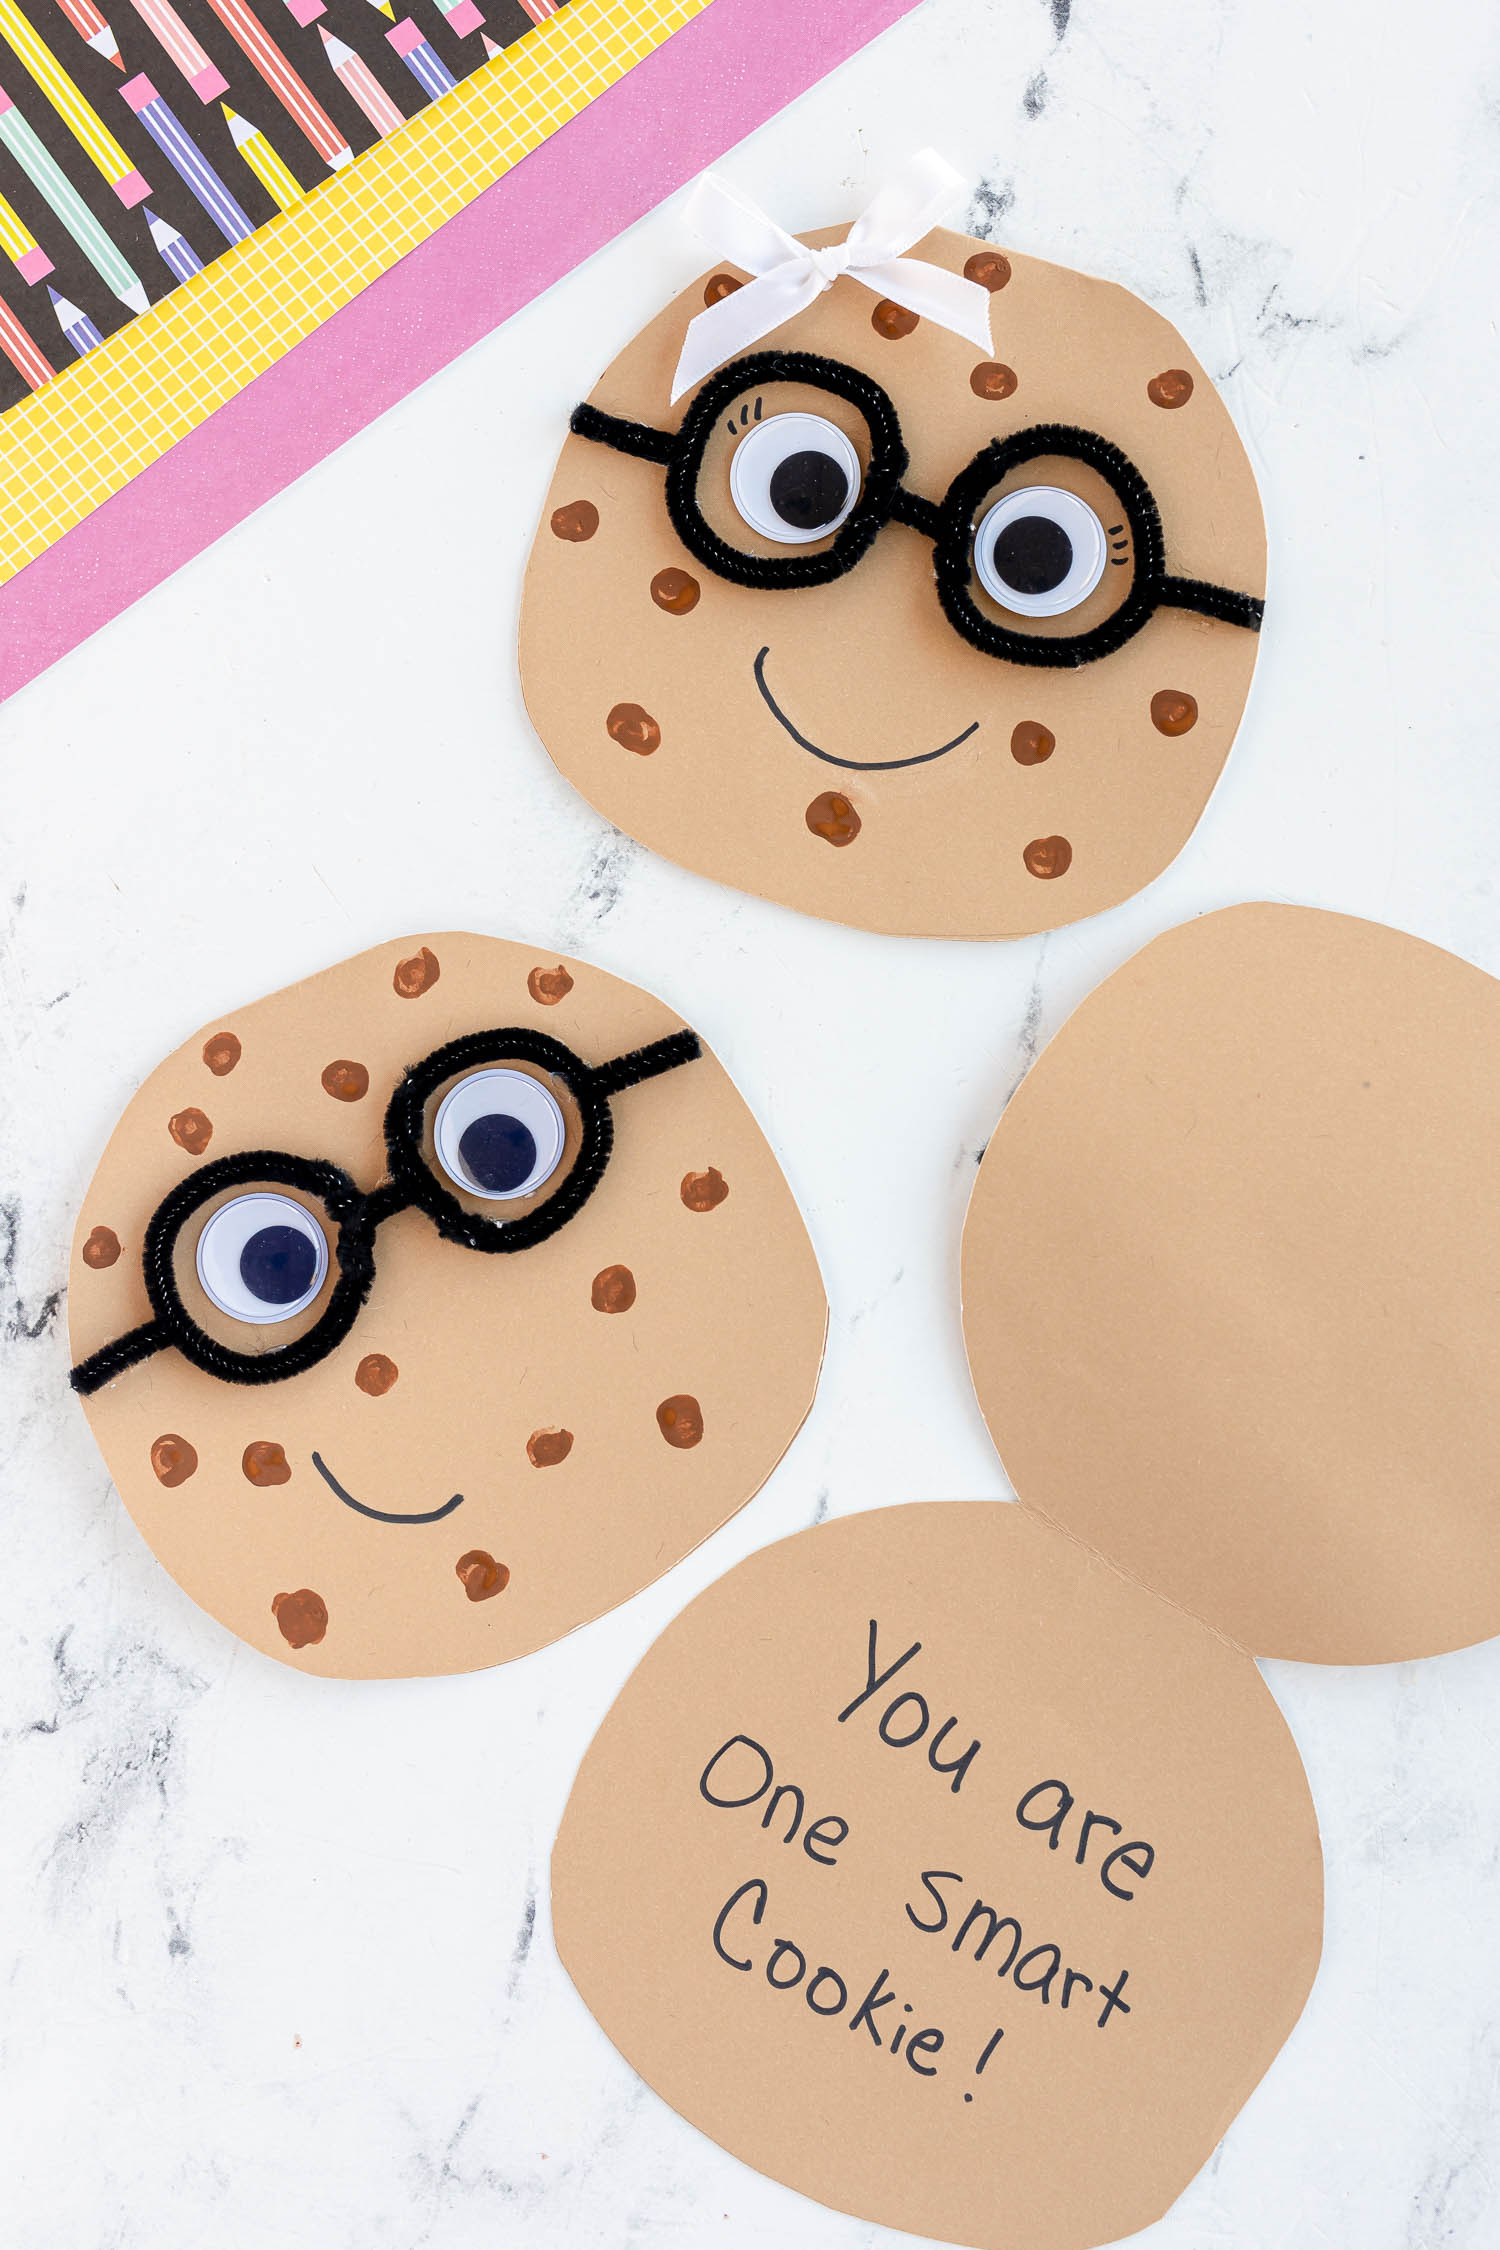 smart cookie paper craft with qtip painted chocolate chips